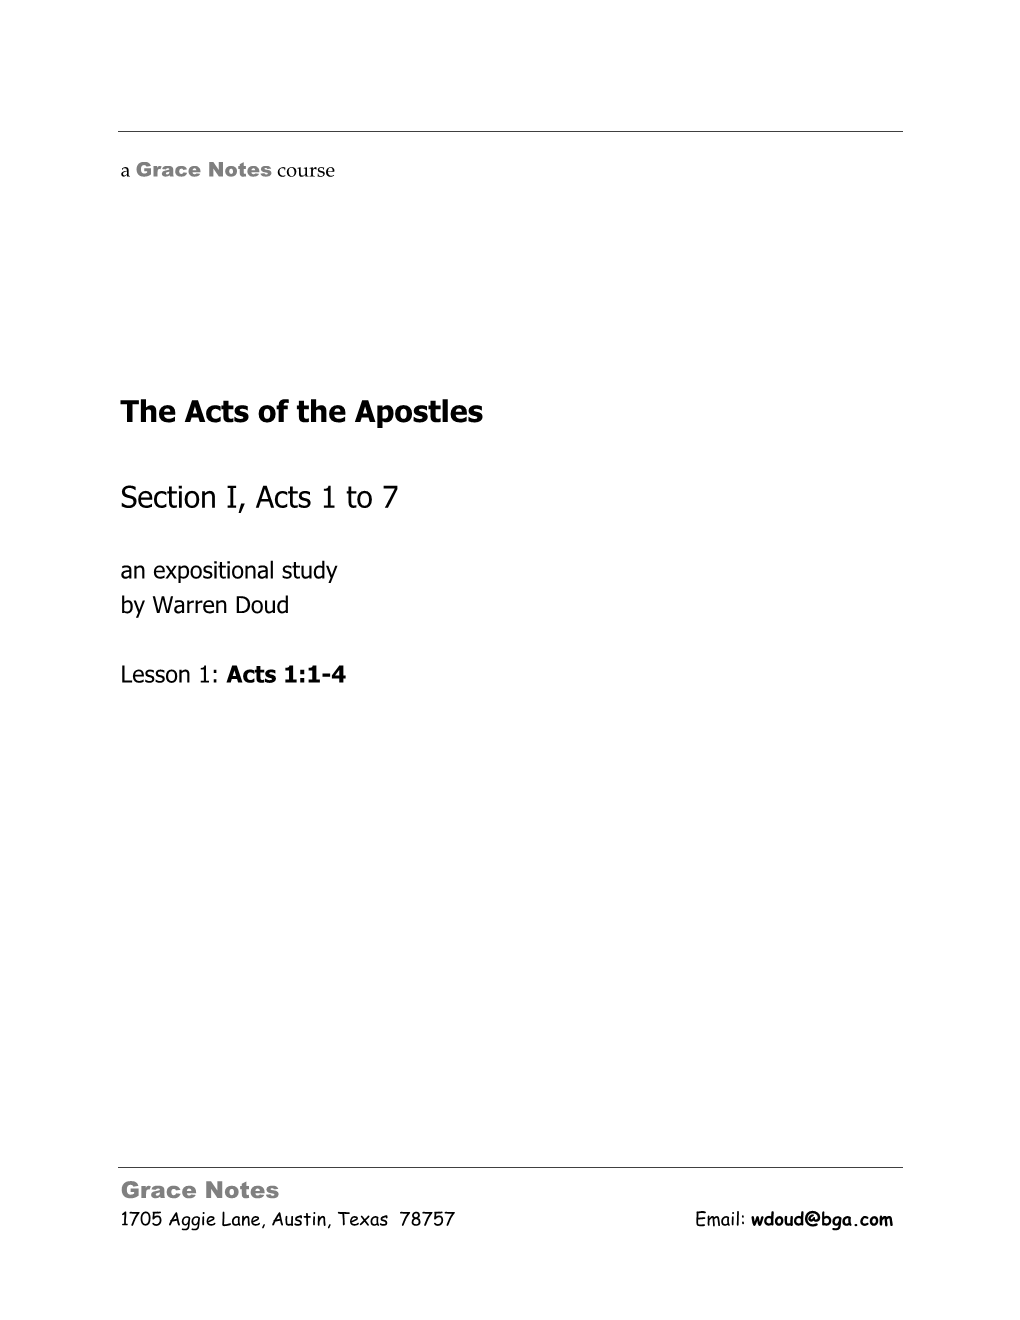 The Acts of the Apostles Section I, Acts 1 to 7